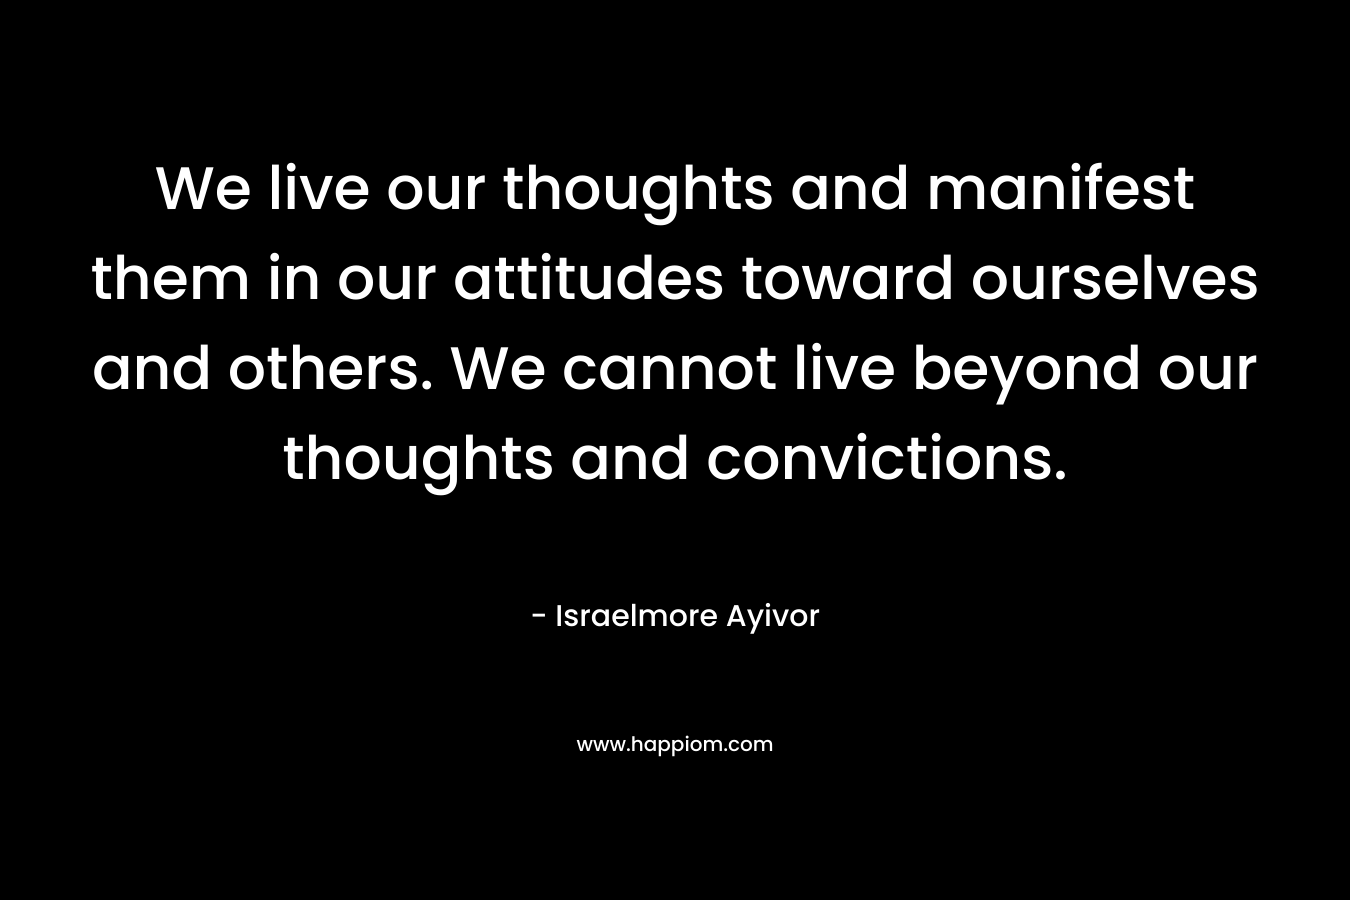 We live our thoughts and manifest them in our attitudes toward ourselves and others. We cannot live beyond our thoughts and convictions. – Israelmore Ayivor